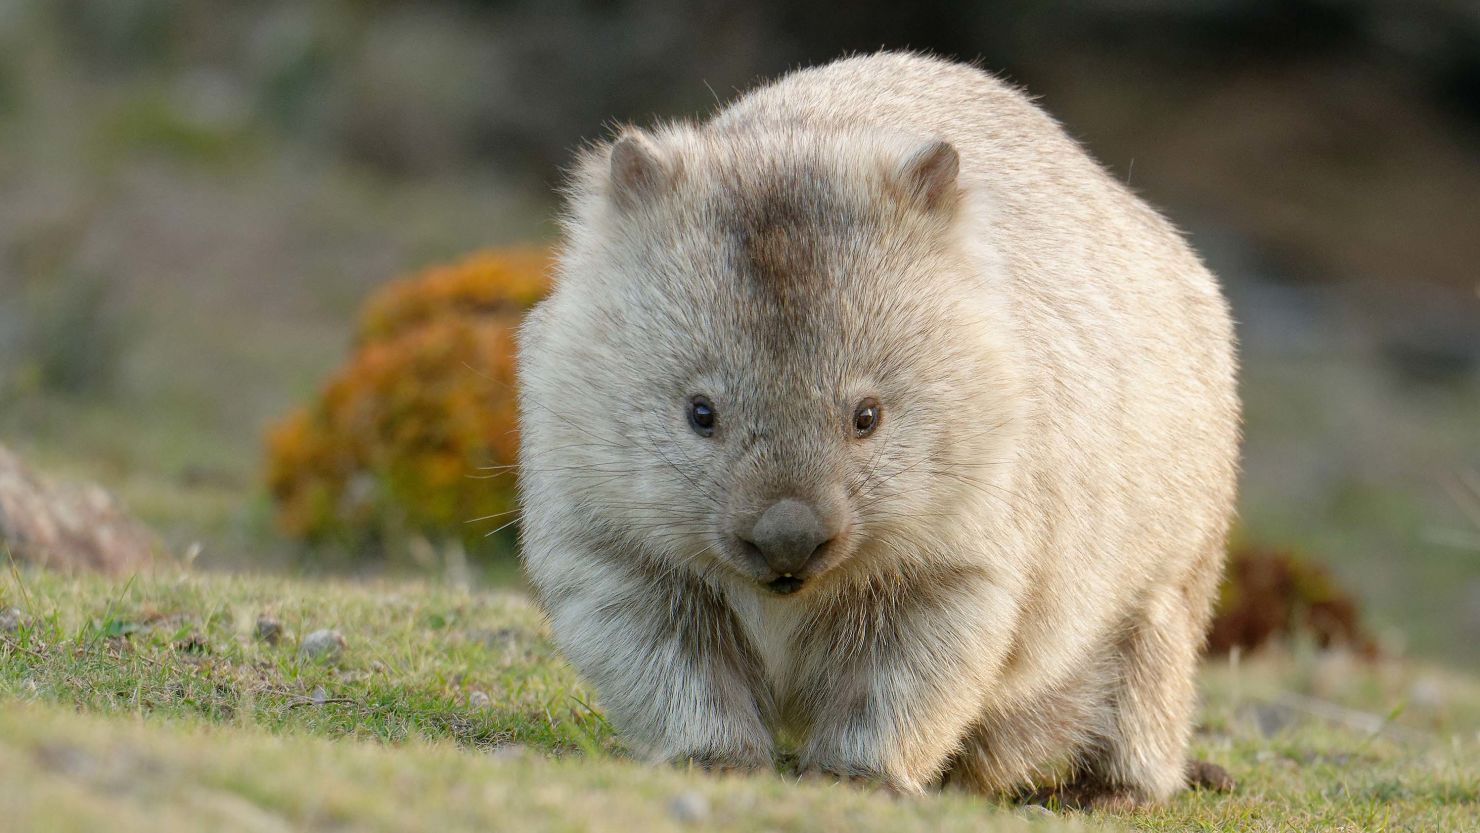 The common wombat (Vombatus ursinus), also known as the coarse-haired or bare-nosed wombat, poops cube-shaped feces.